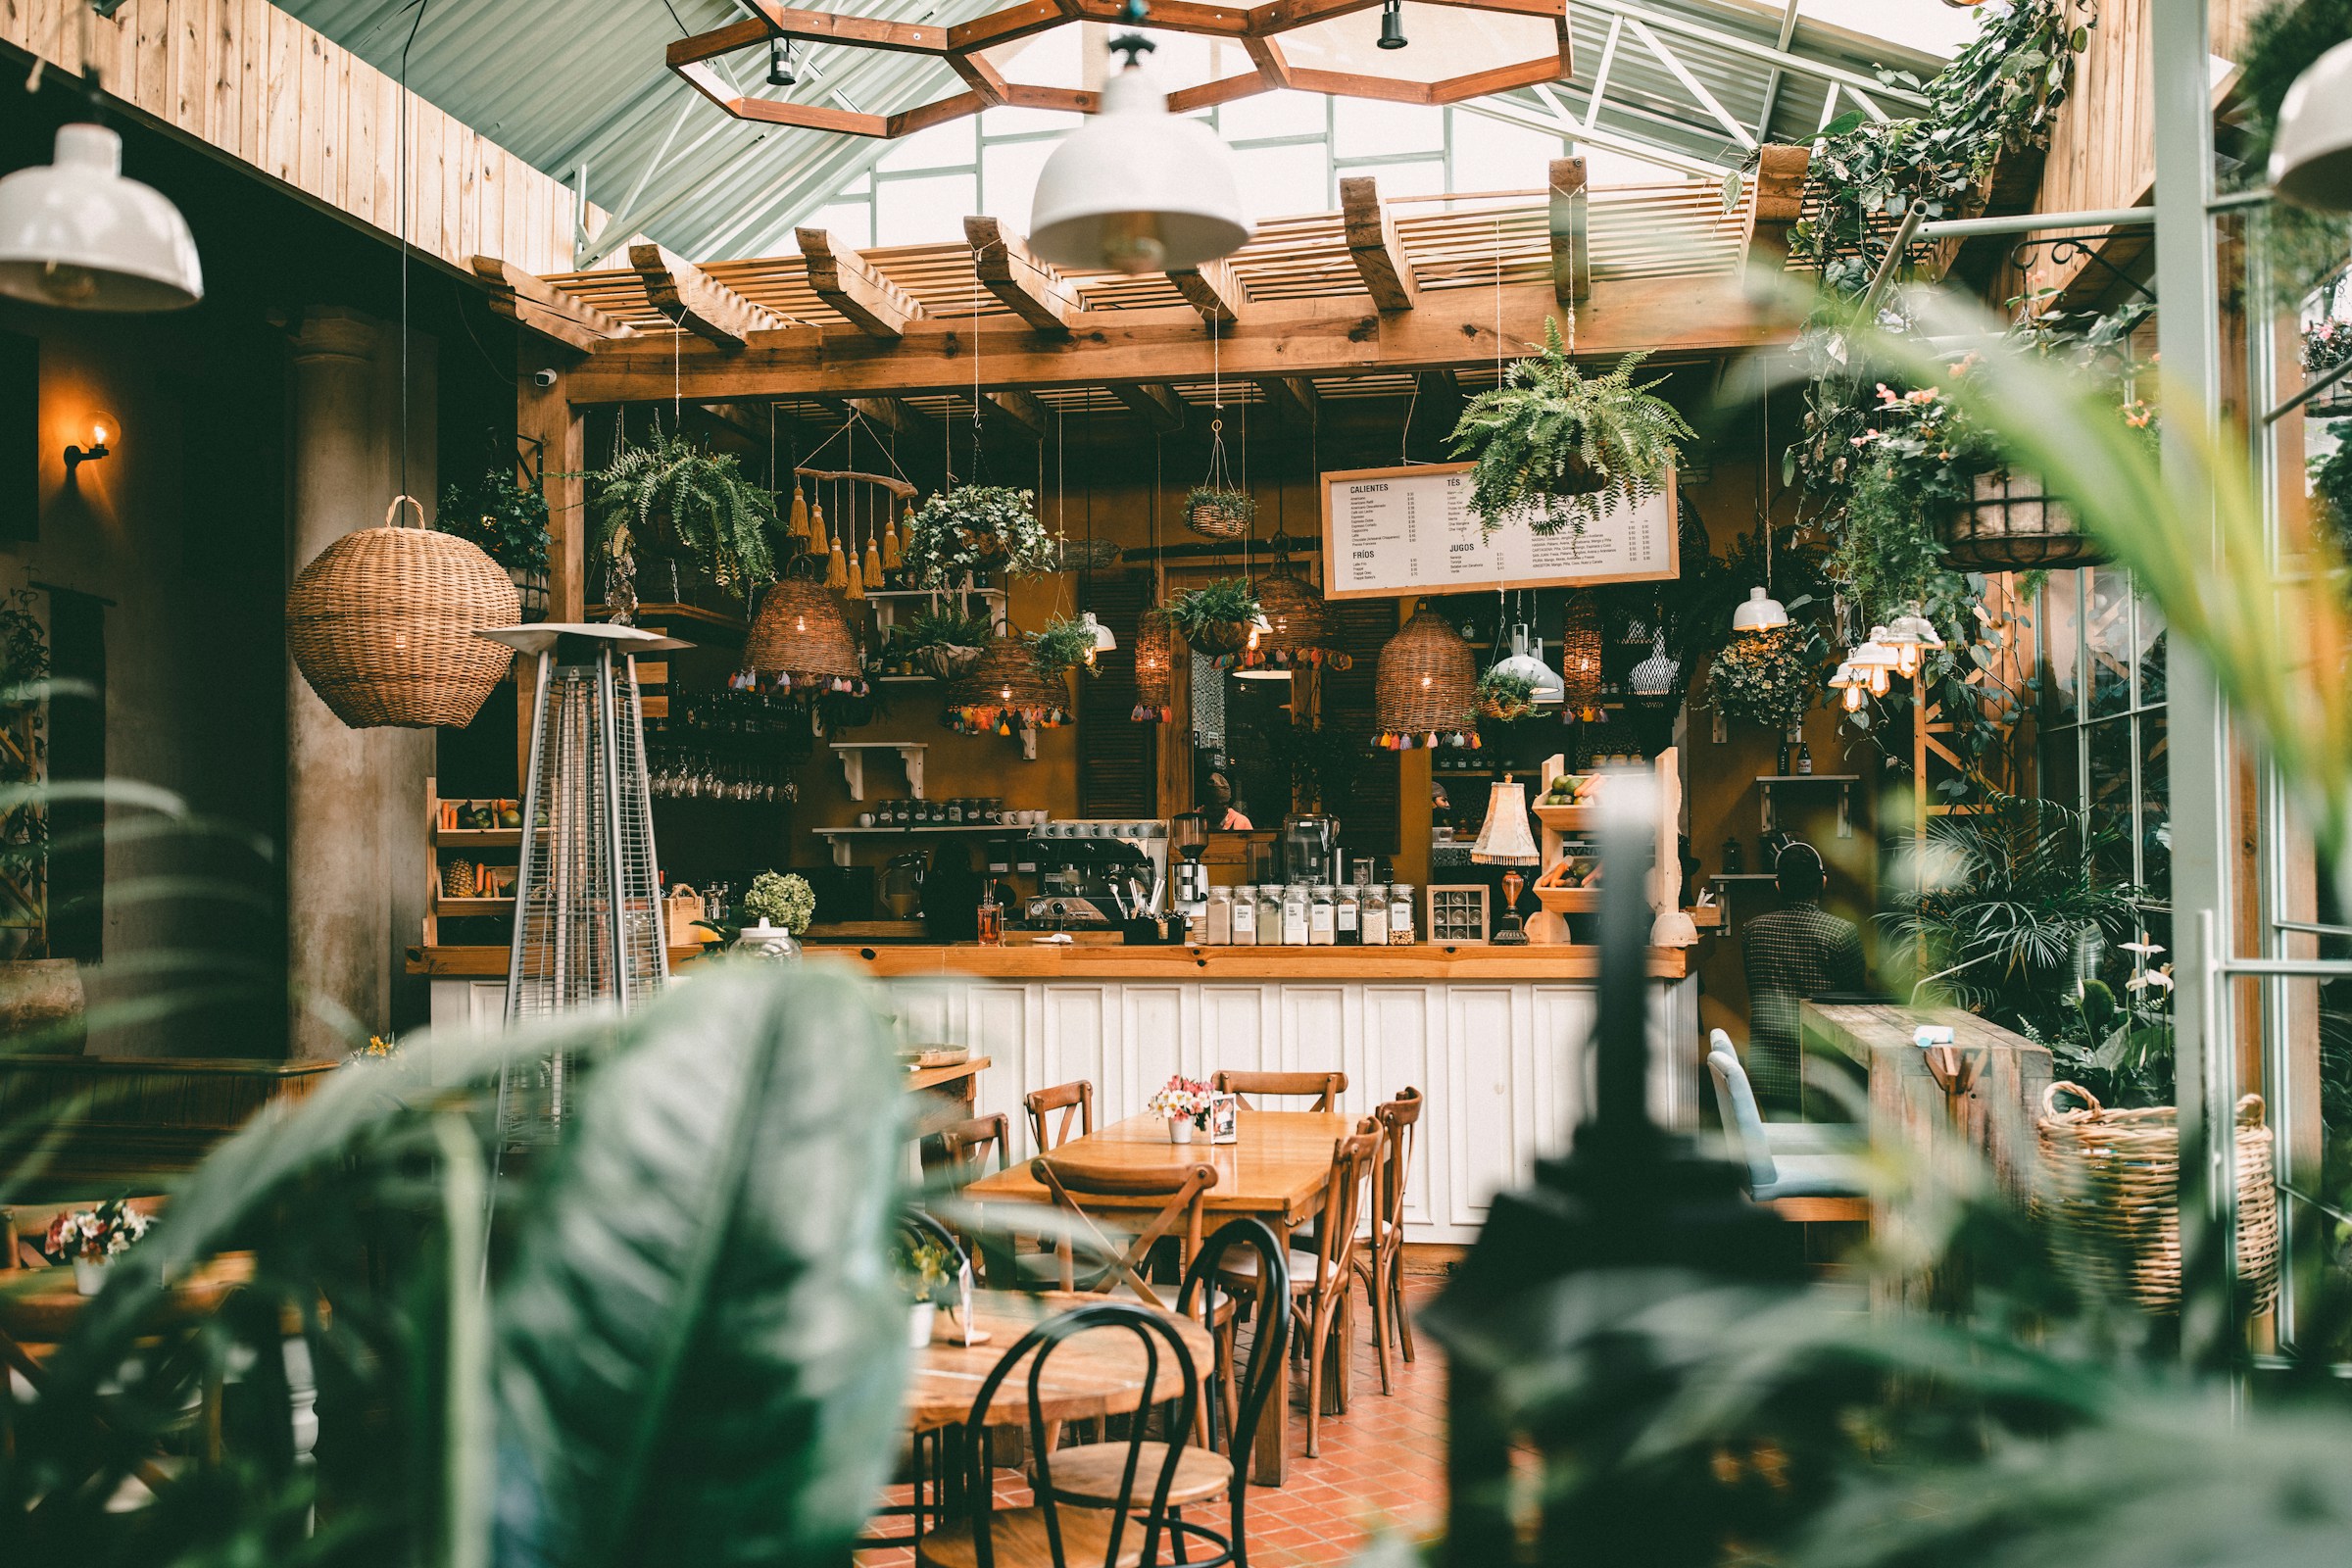 The interior of a coffee shop | Source: Unsplash